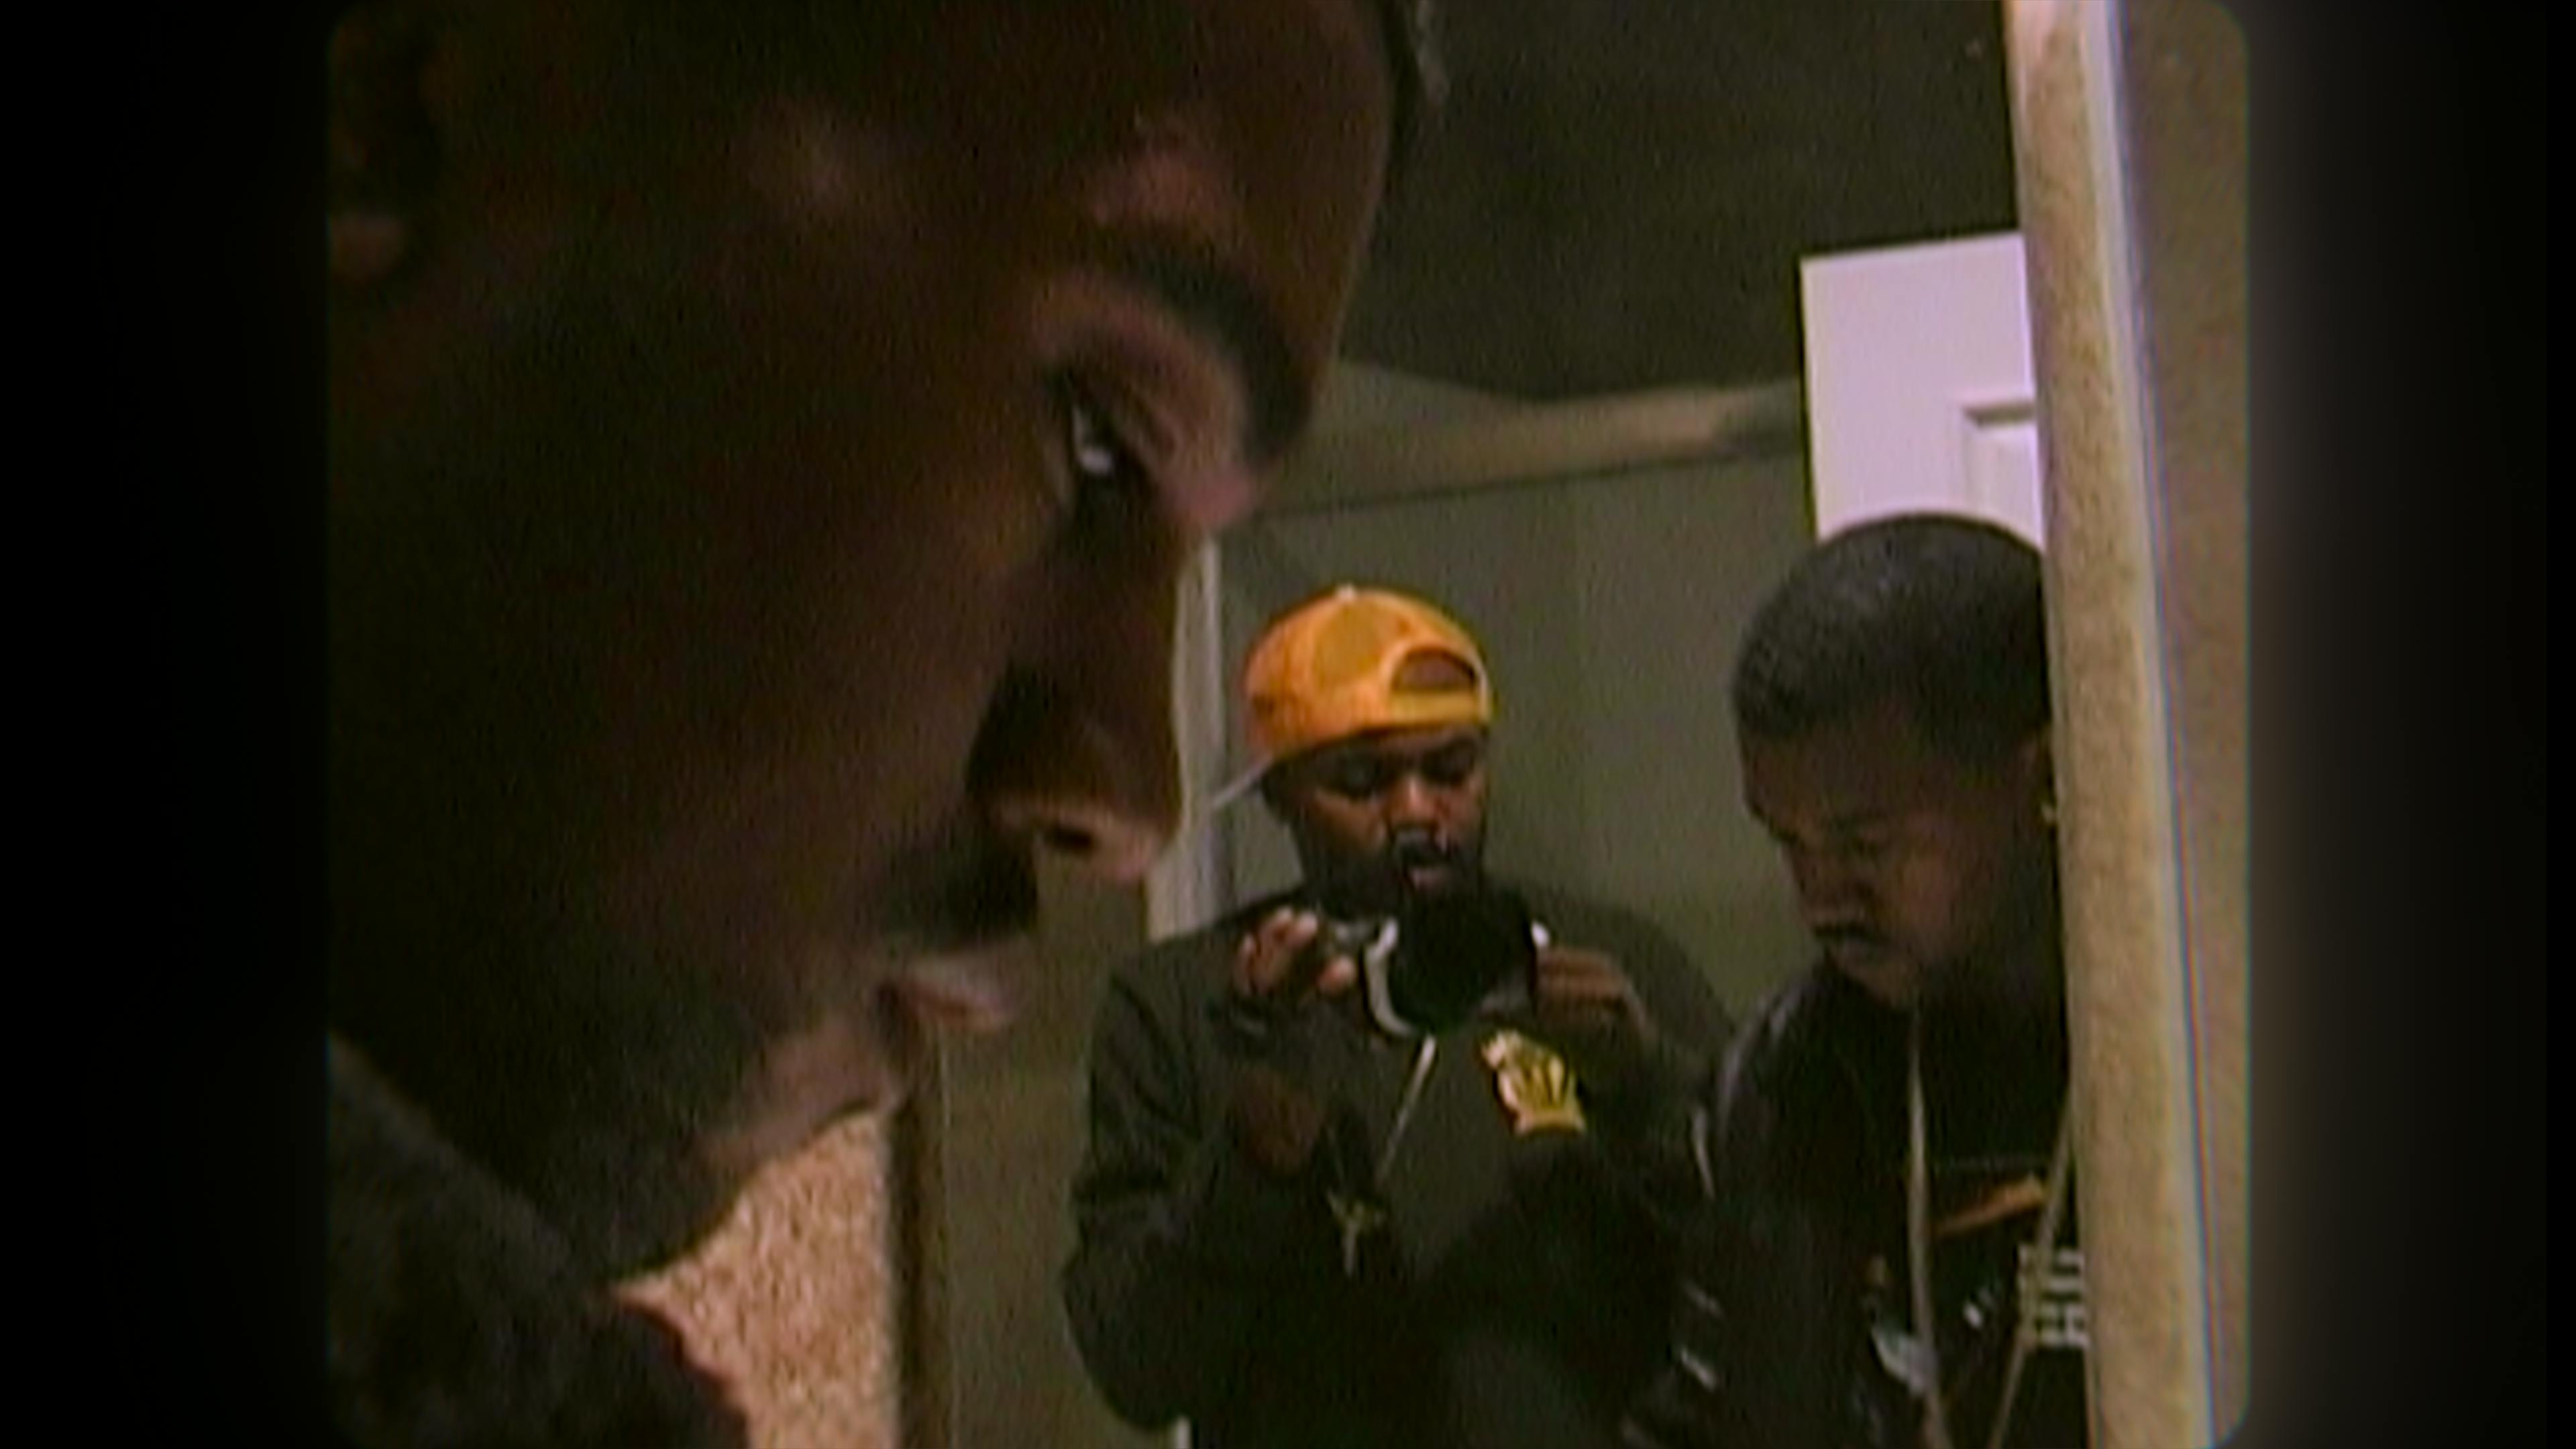 Kanye West looks down in a dark top. He's filmed by Coodie who wears a yellow hat.